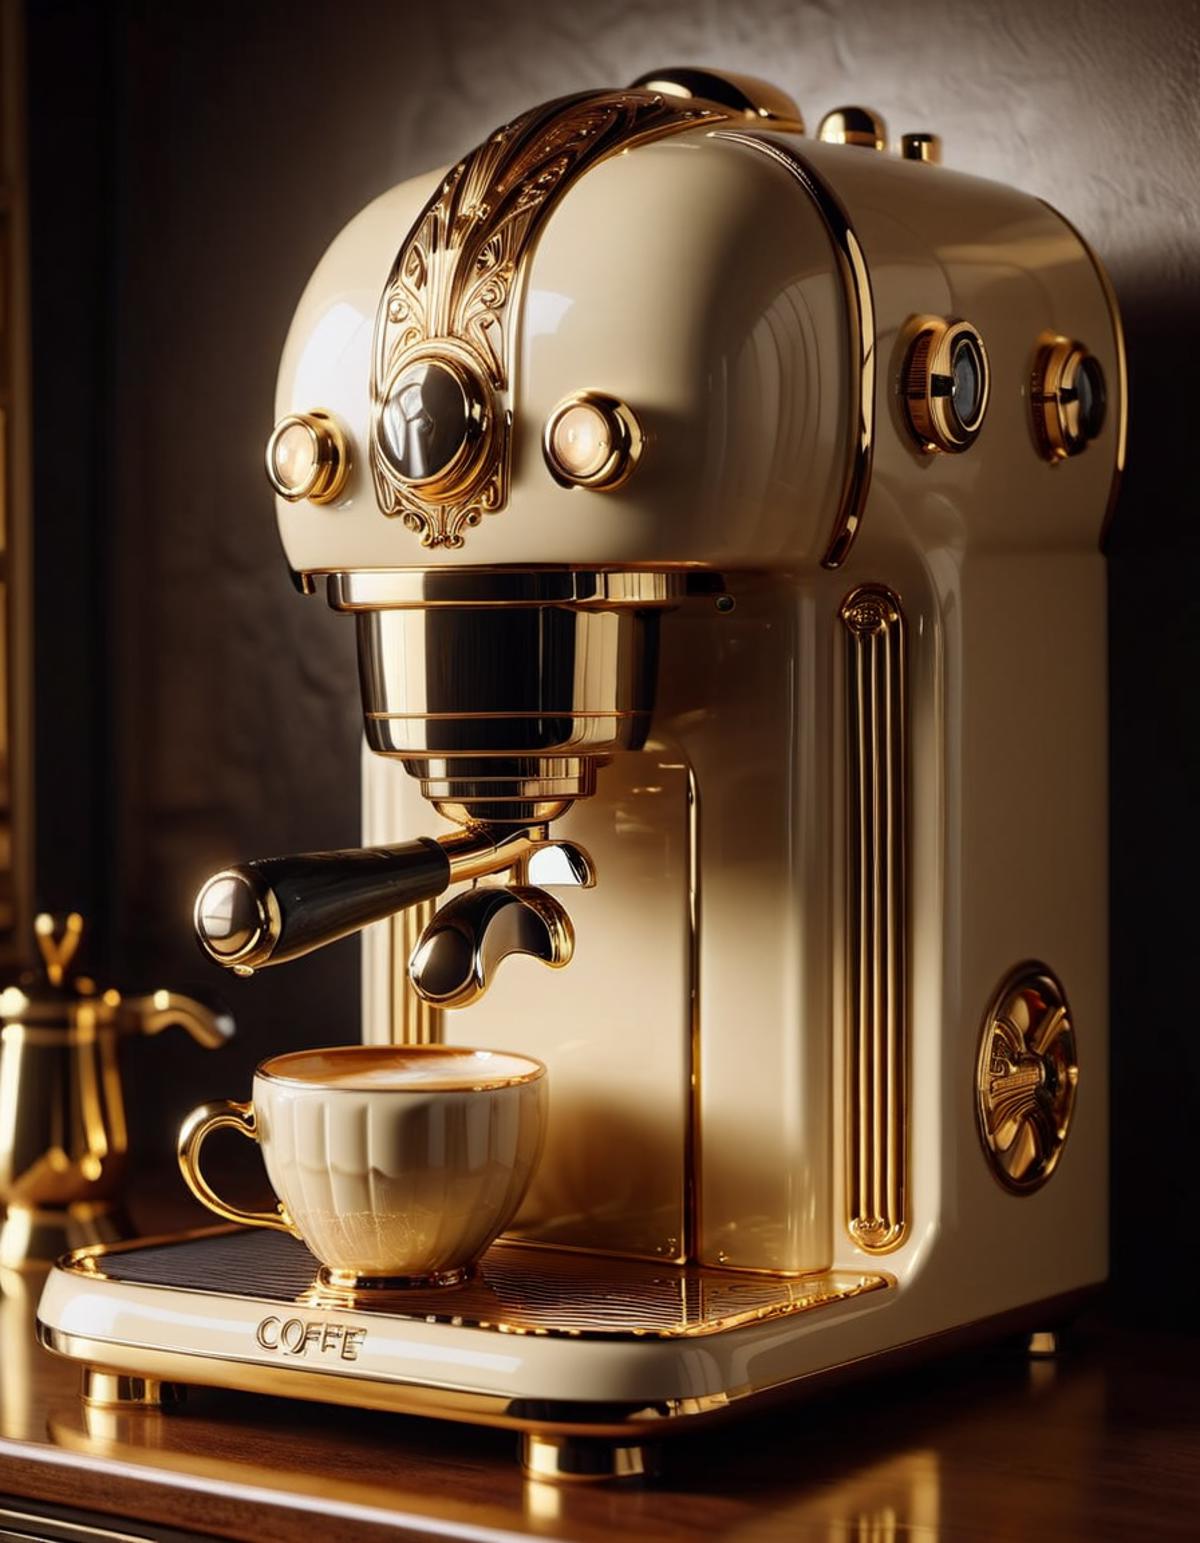 A Coffee Maker with a Golden Finish and a Cup of Coffee on the Platform.